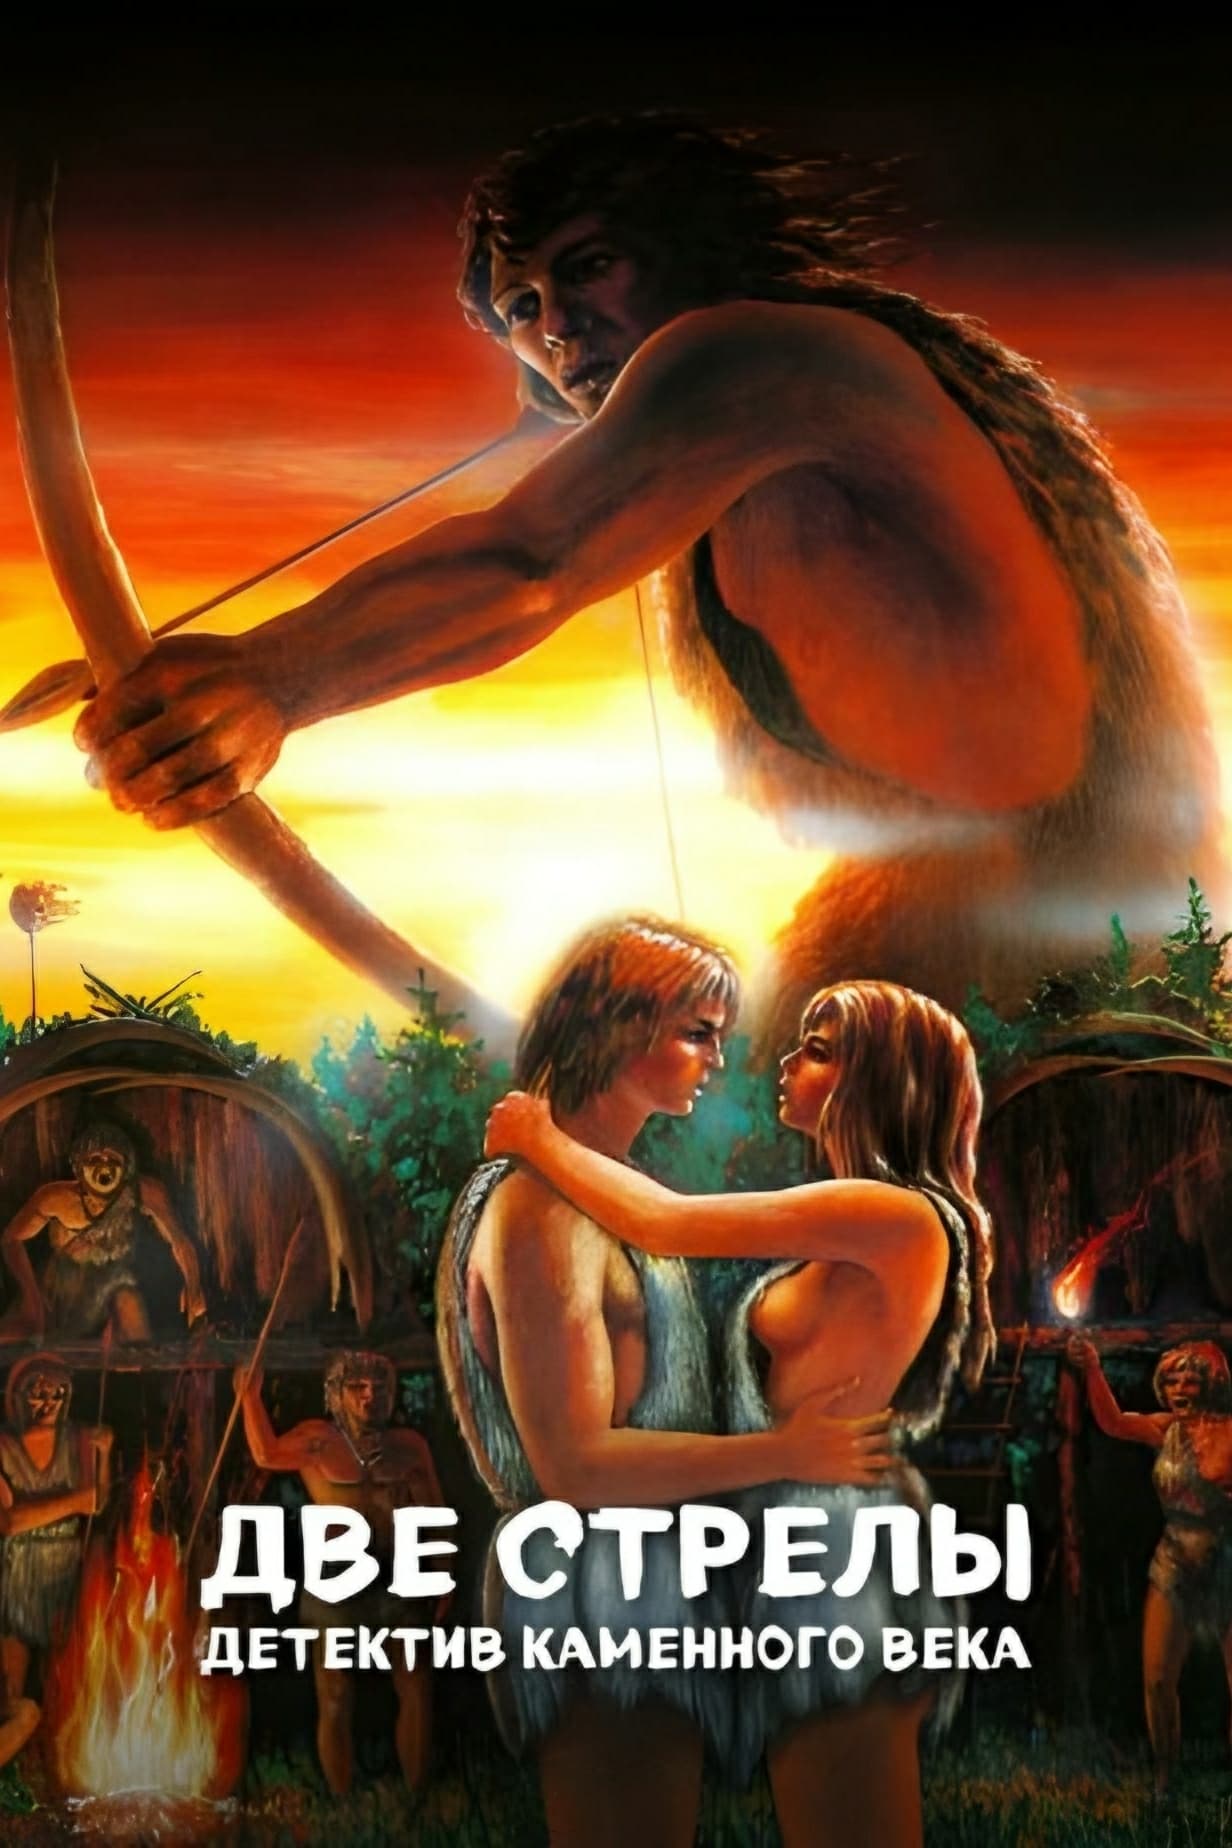 Two Arrows. Stone Age Detective (1989)